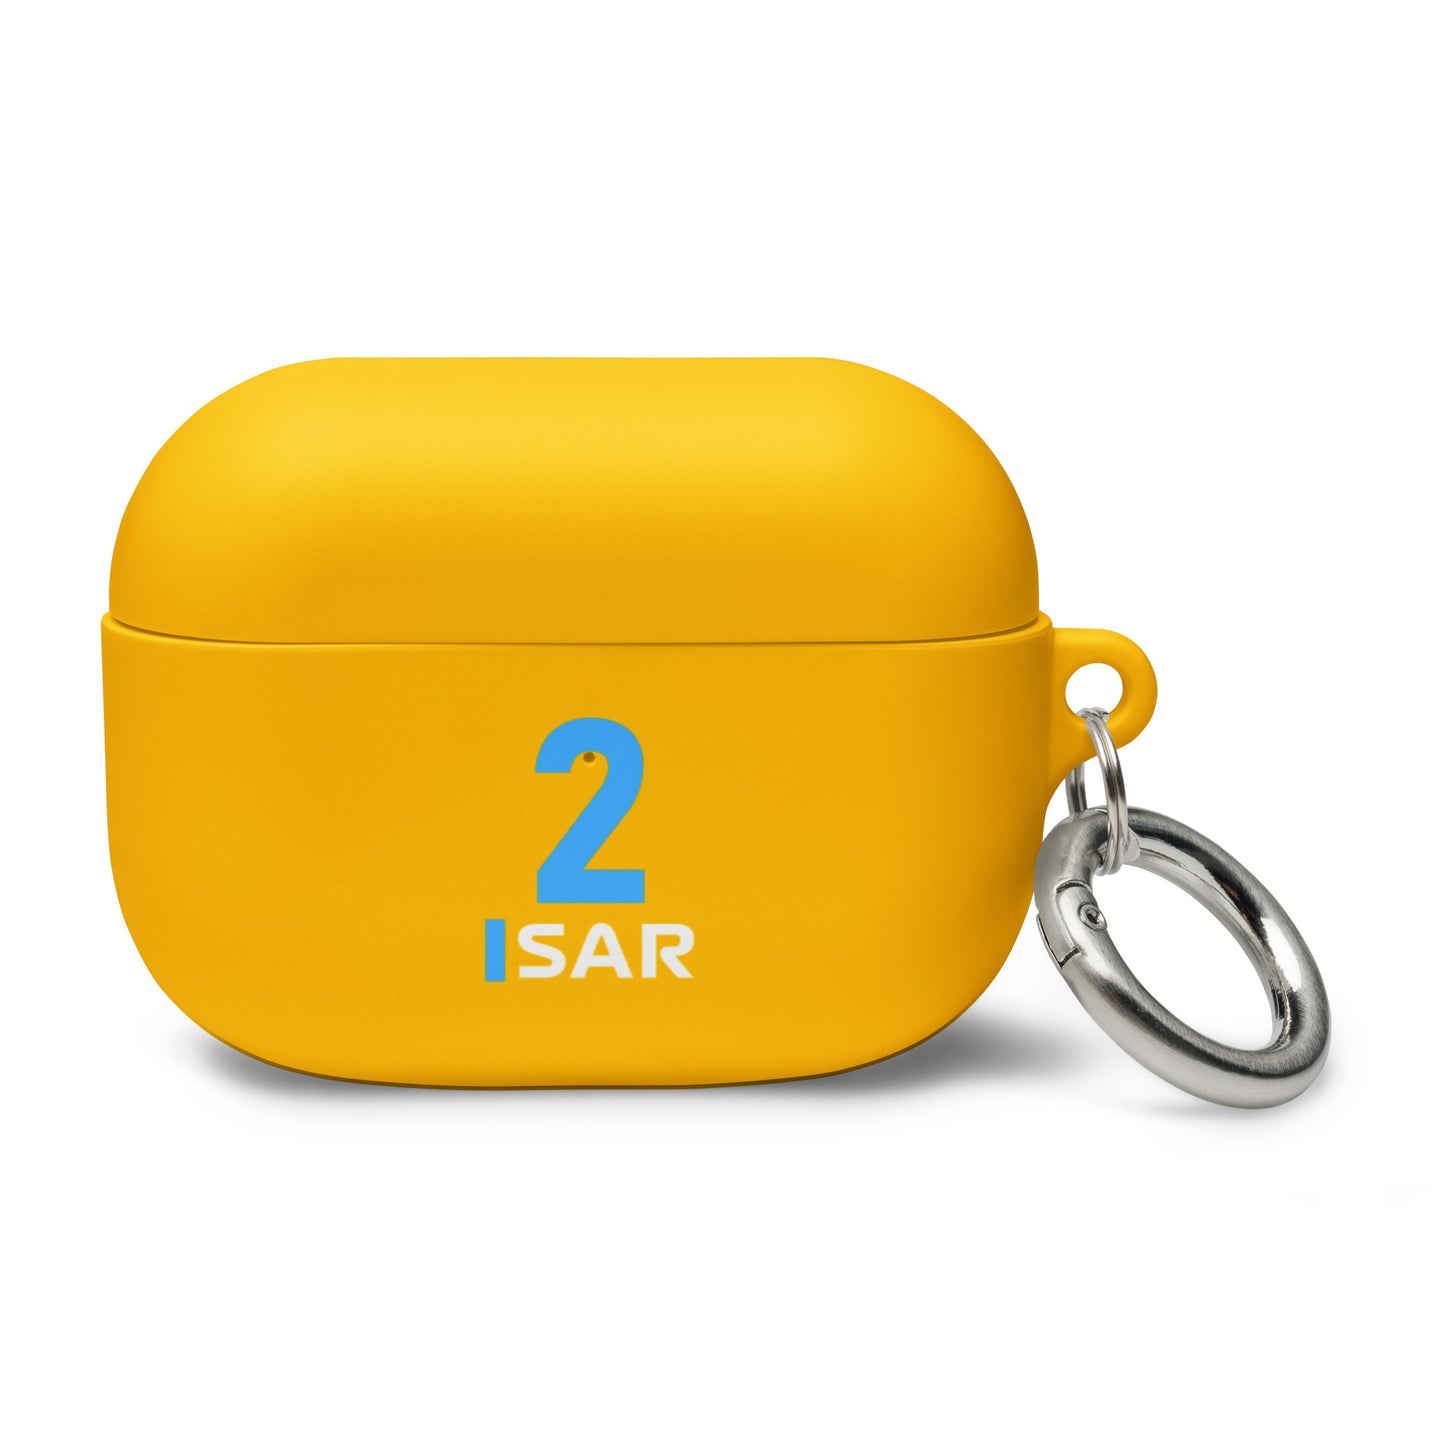 Logan Sargeant AirPods Case pro yellow